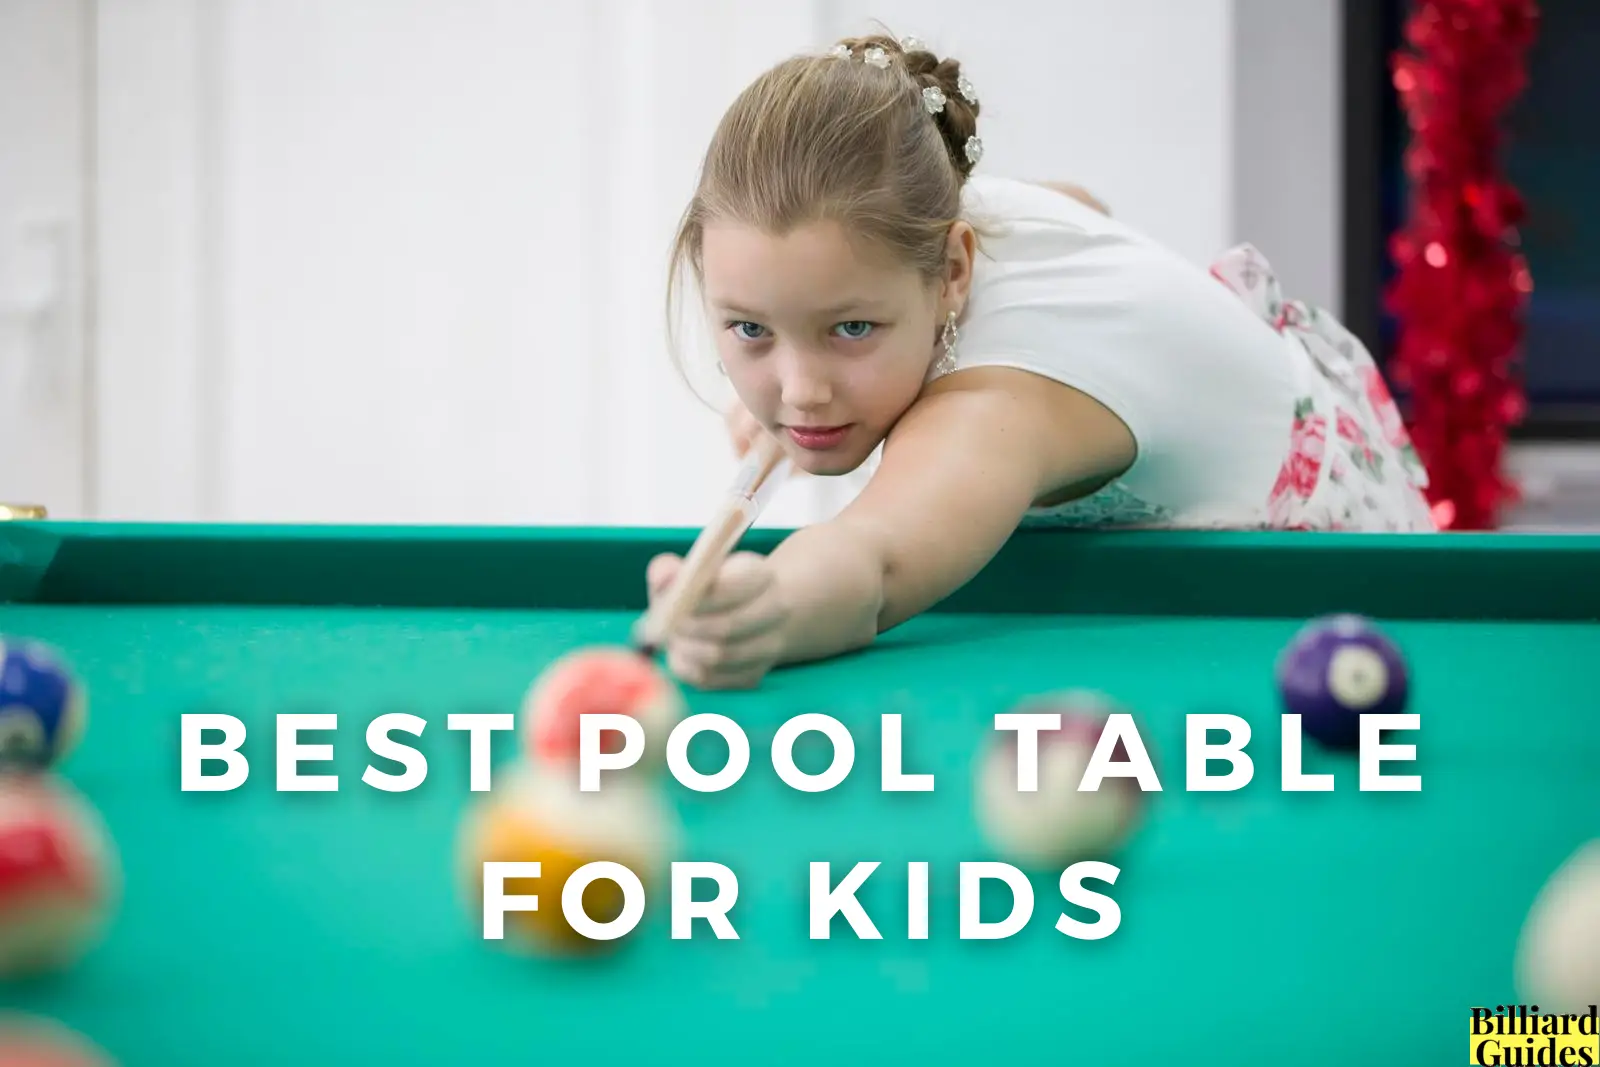 Best Pool table for kids